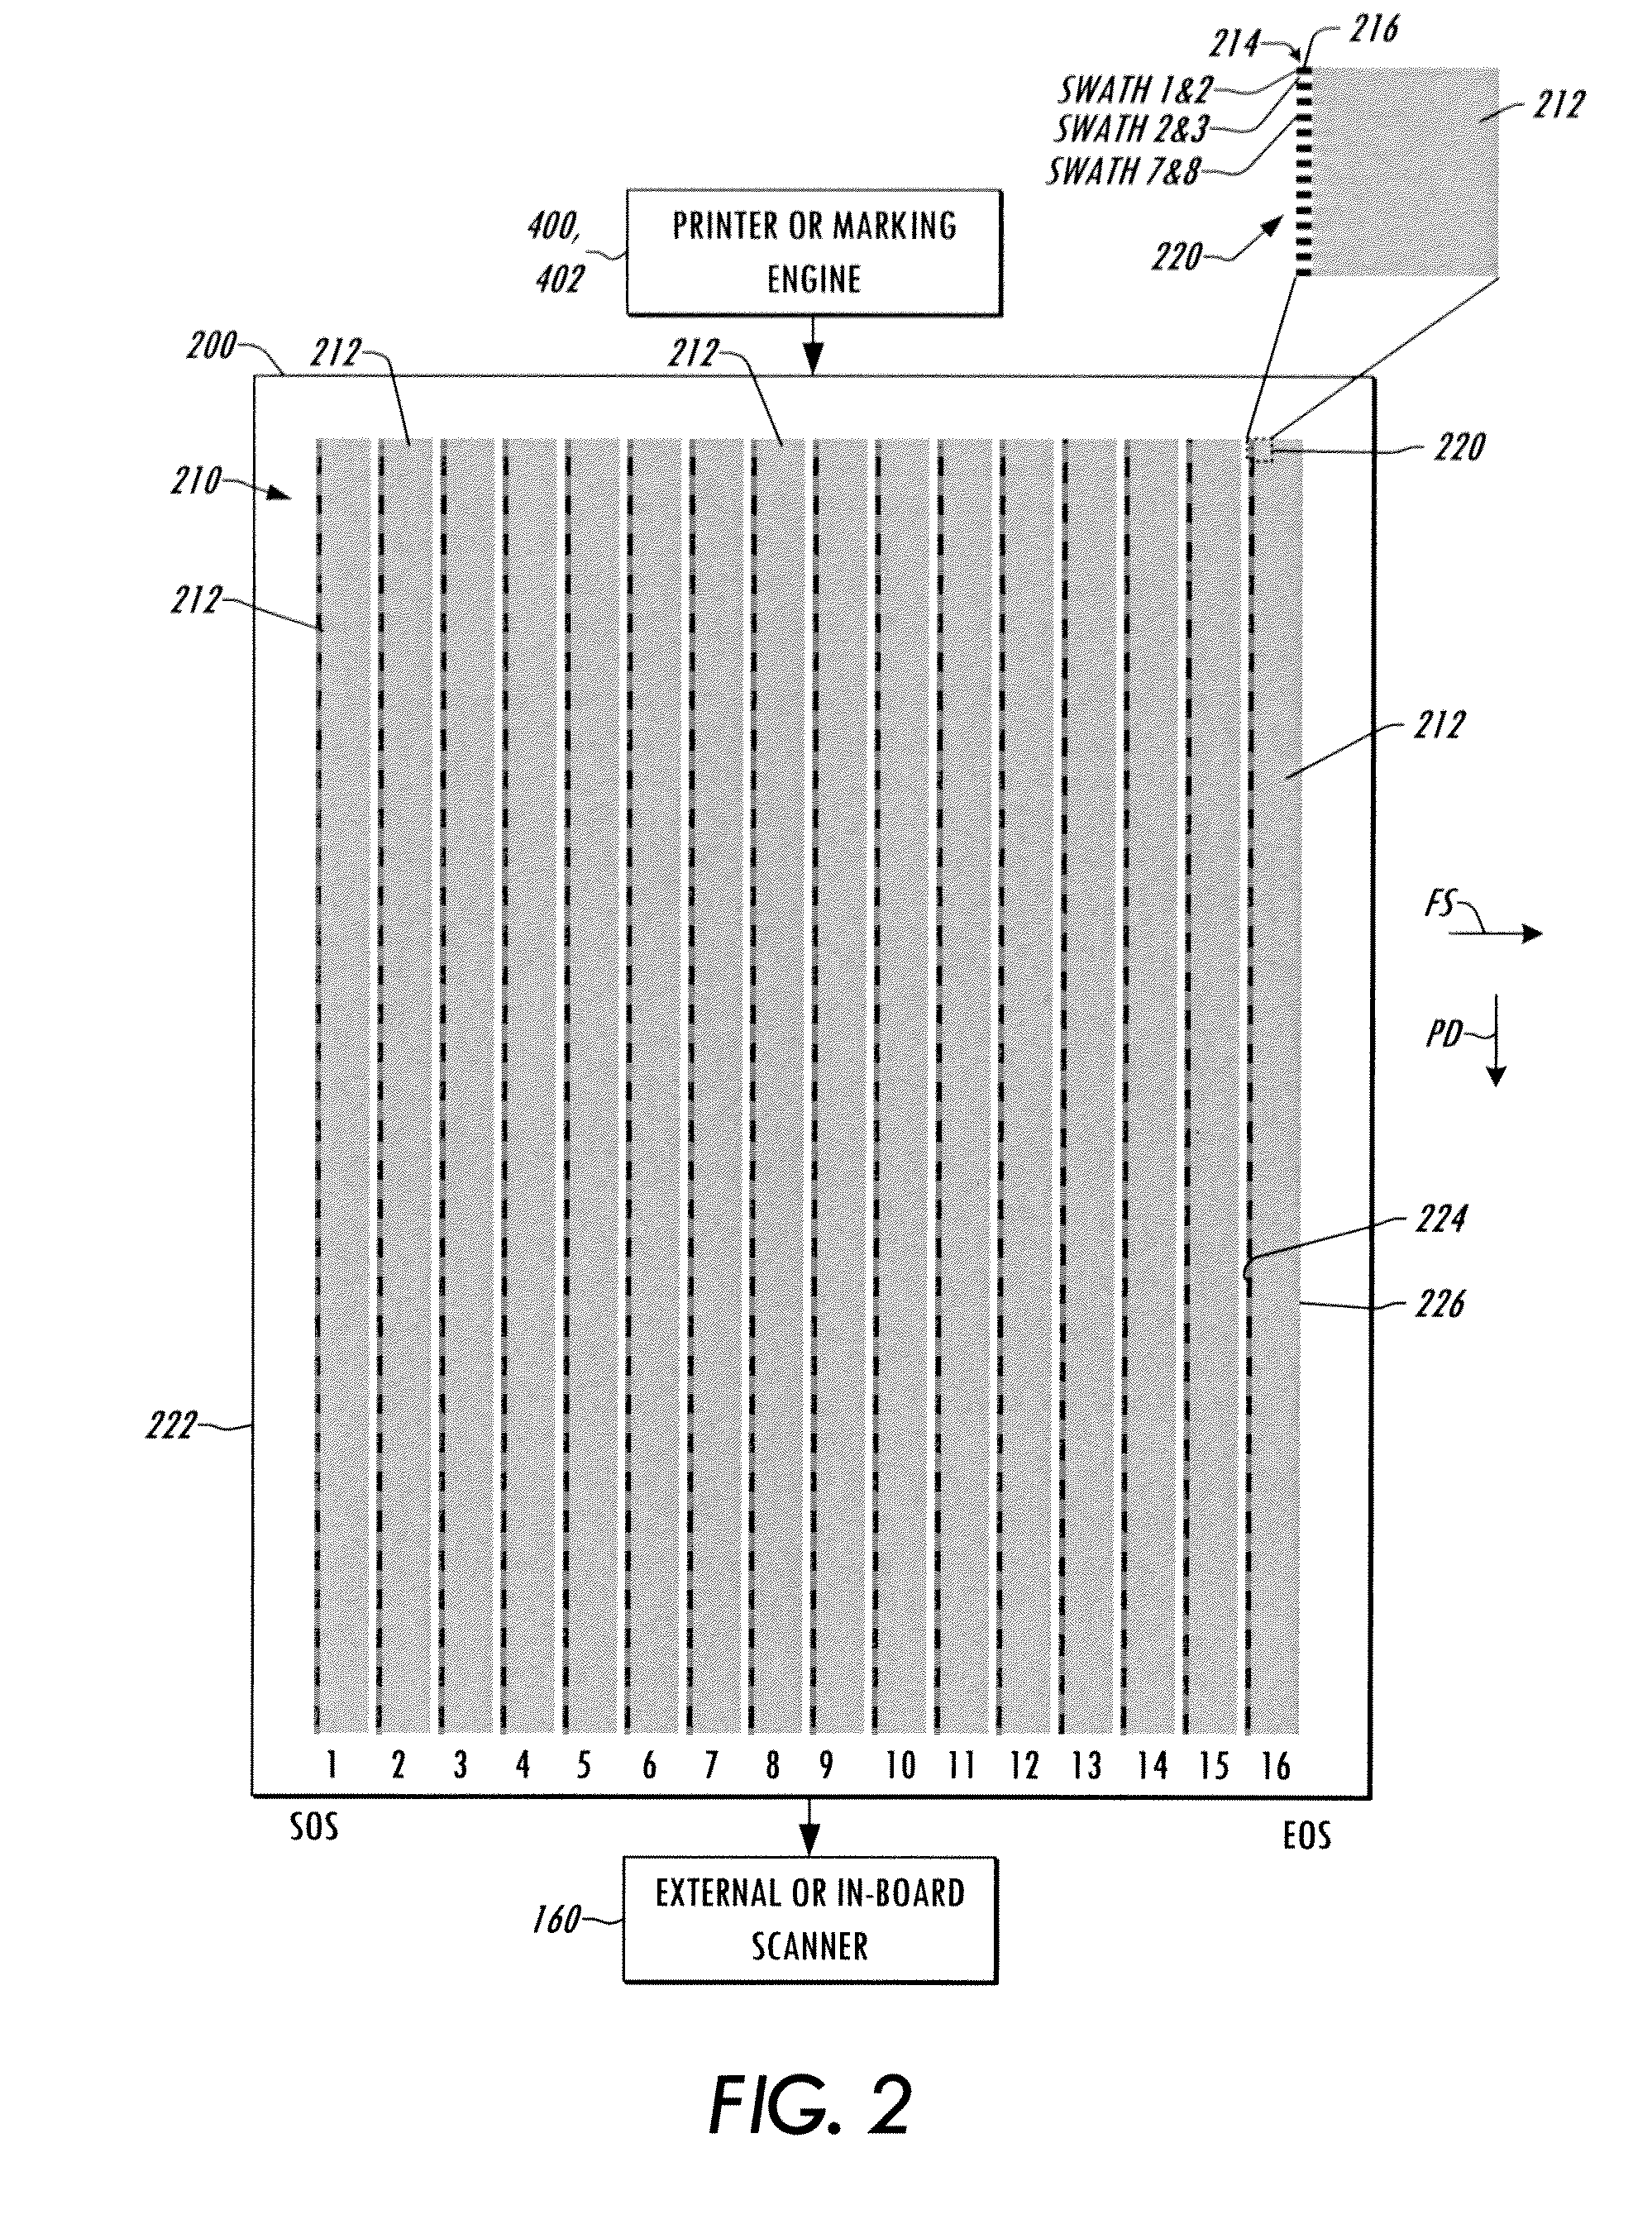 Process for creating facet-specific electronic banding compensation profiles for raster output scanners